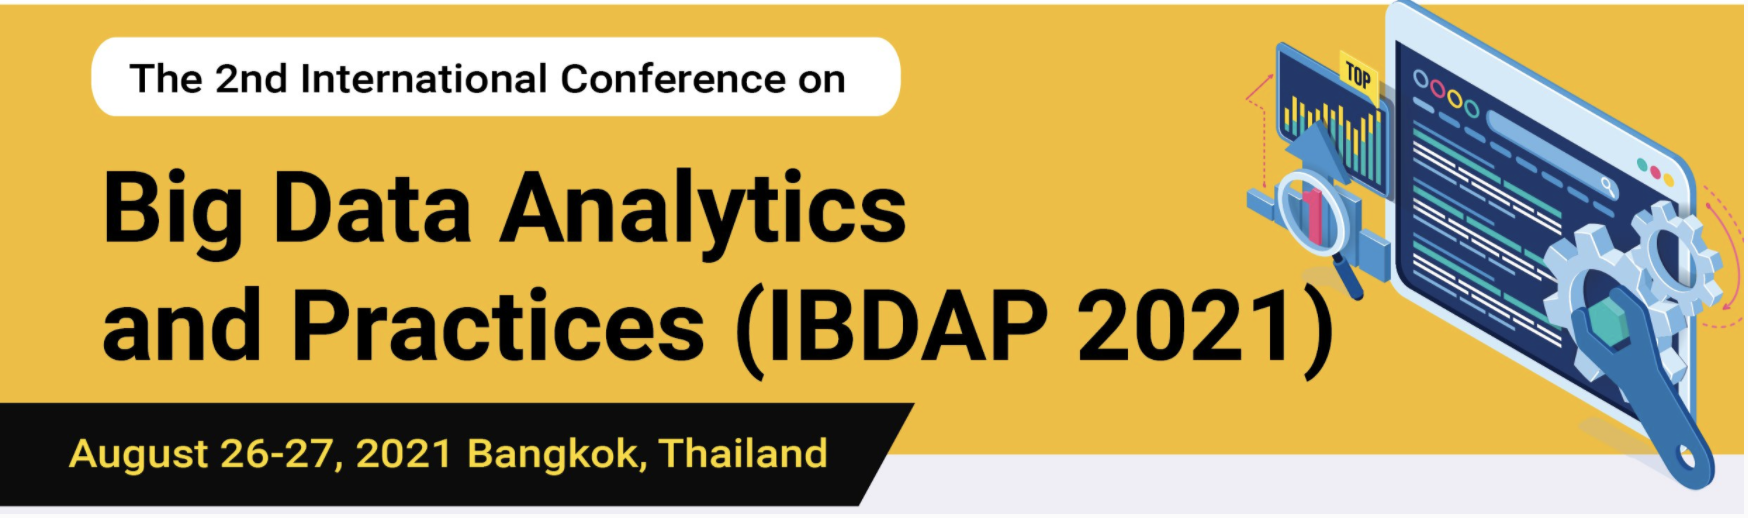 The International Conference on Big Data Analytics and Practices (IBDAP 2021)